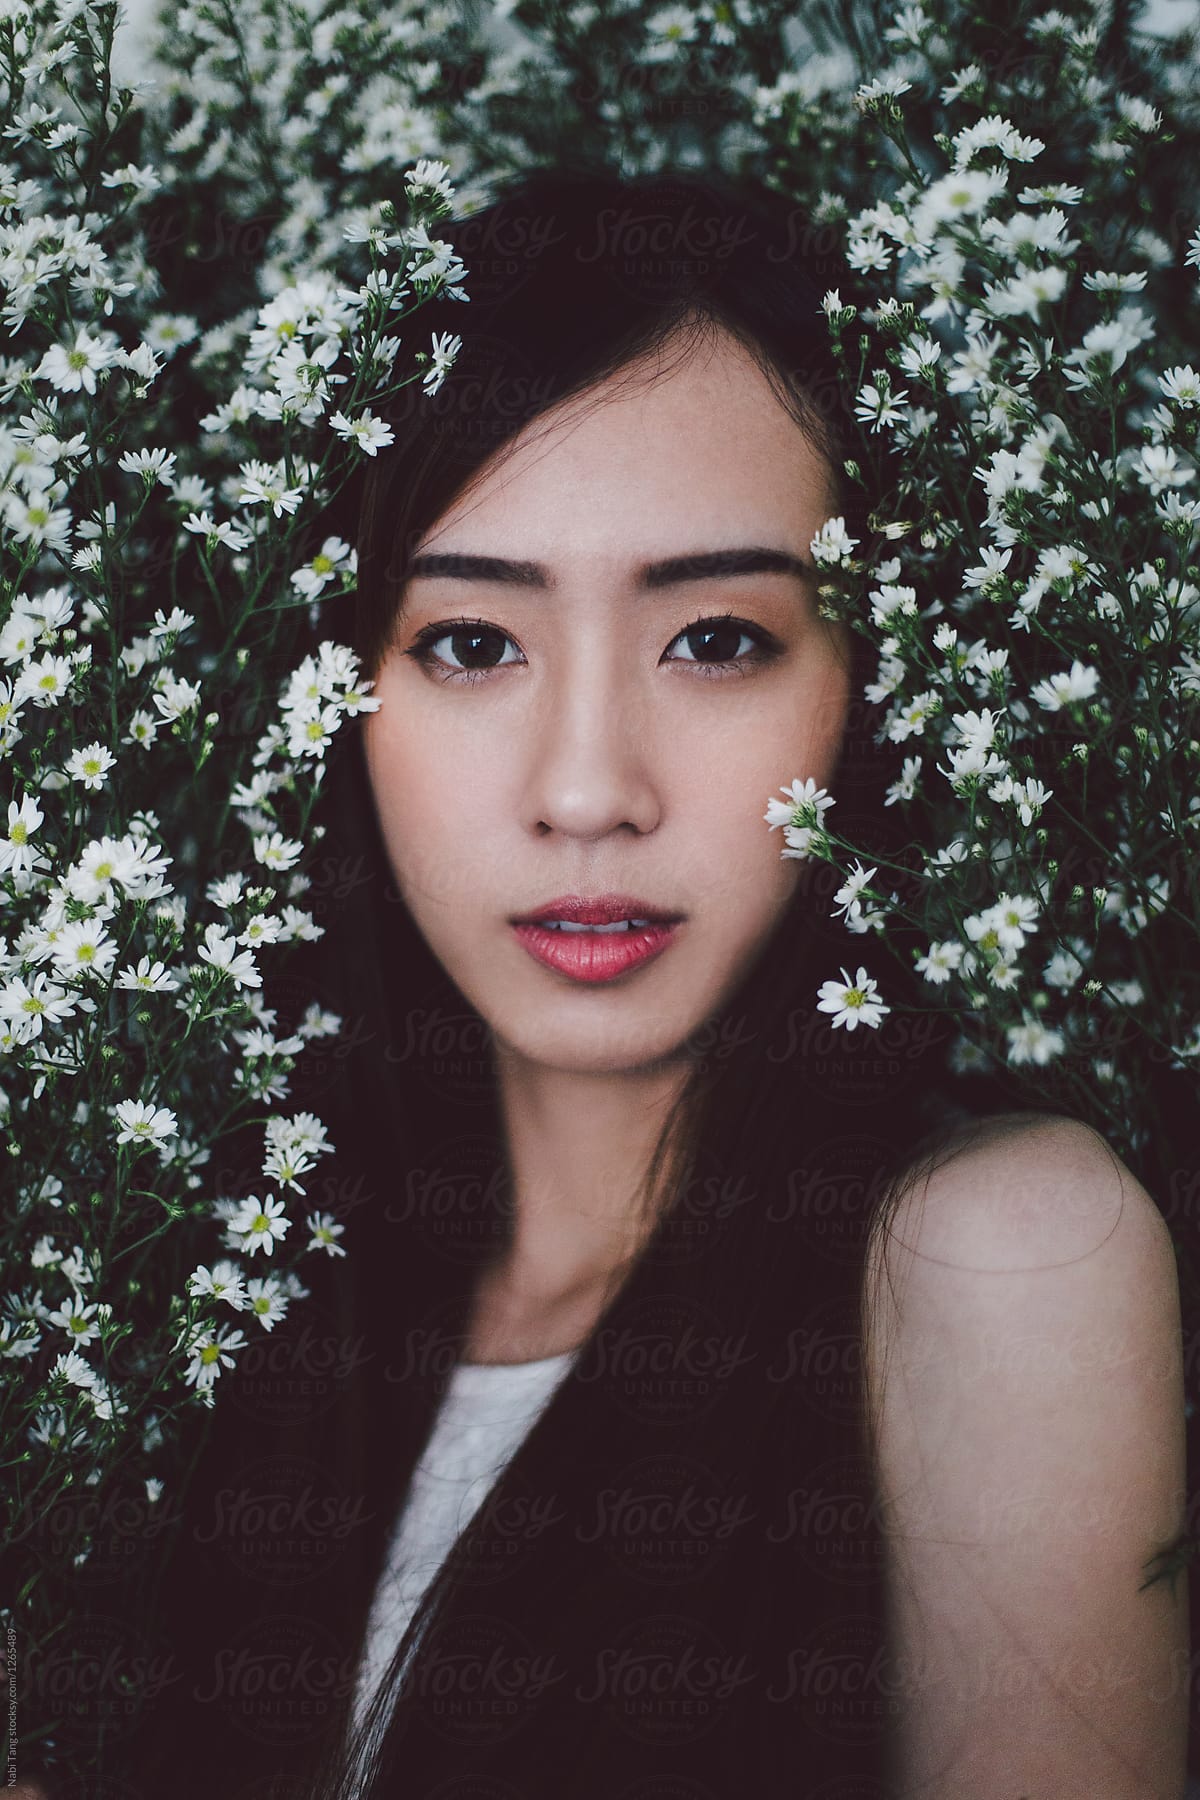 Beautiful Young East Asian Woman Portrait From The Flower Bush By